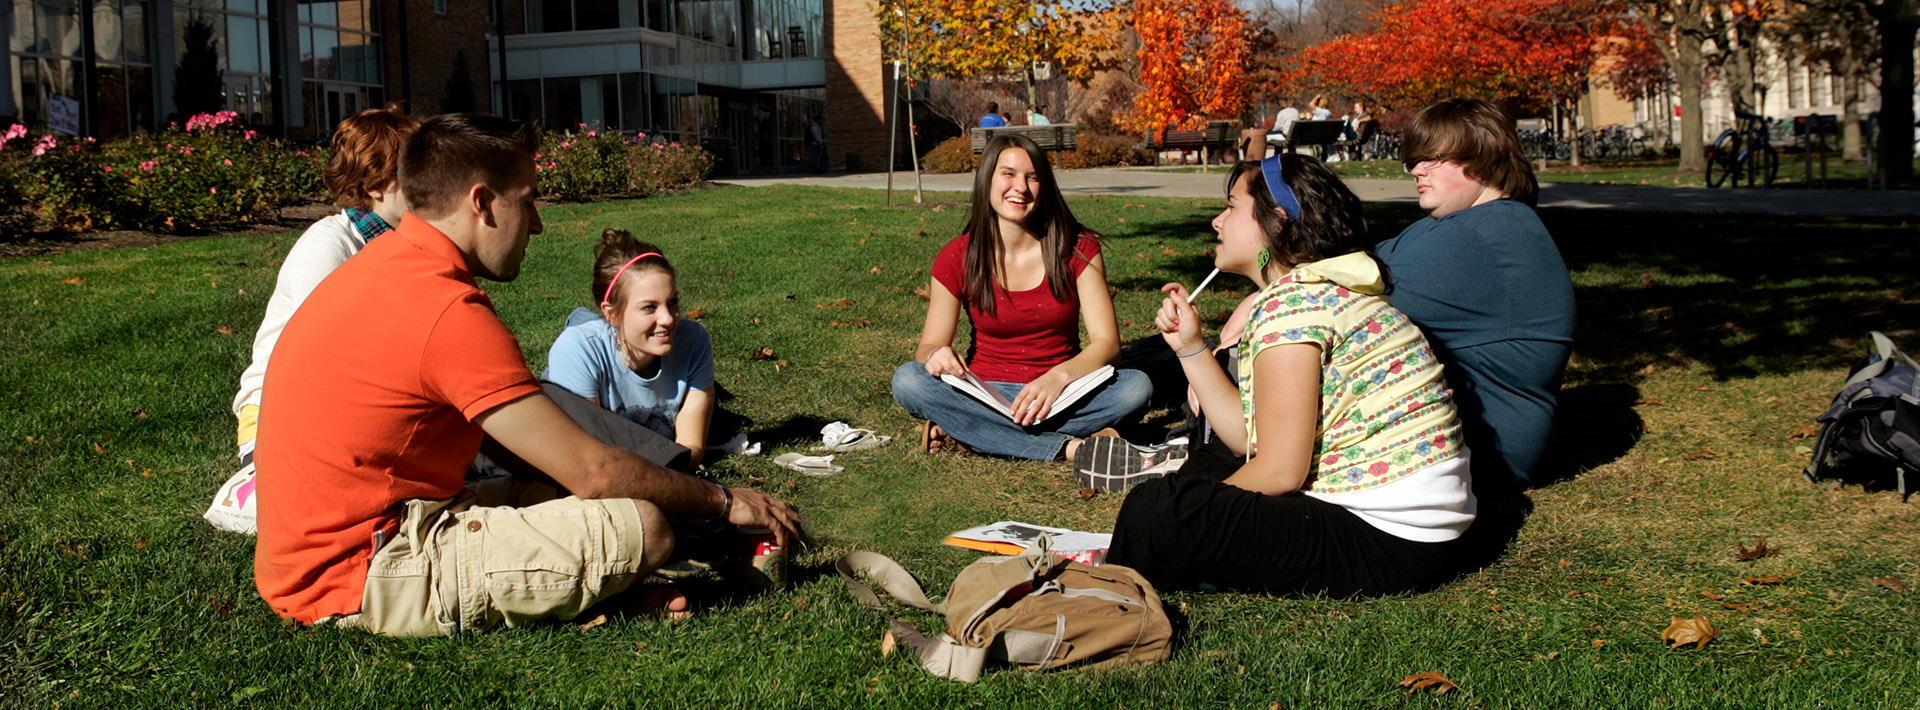 students-outside-studying-campus-08-9161-mini